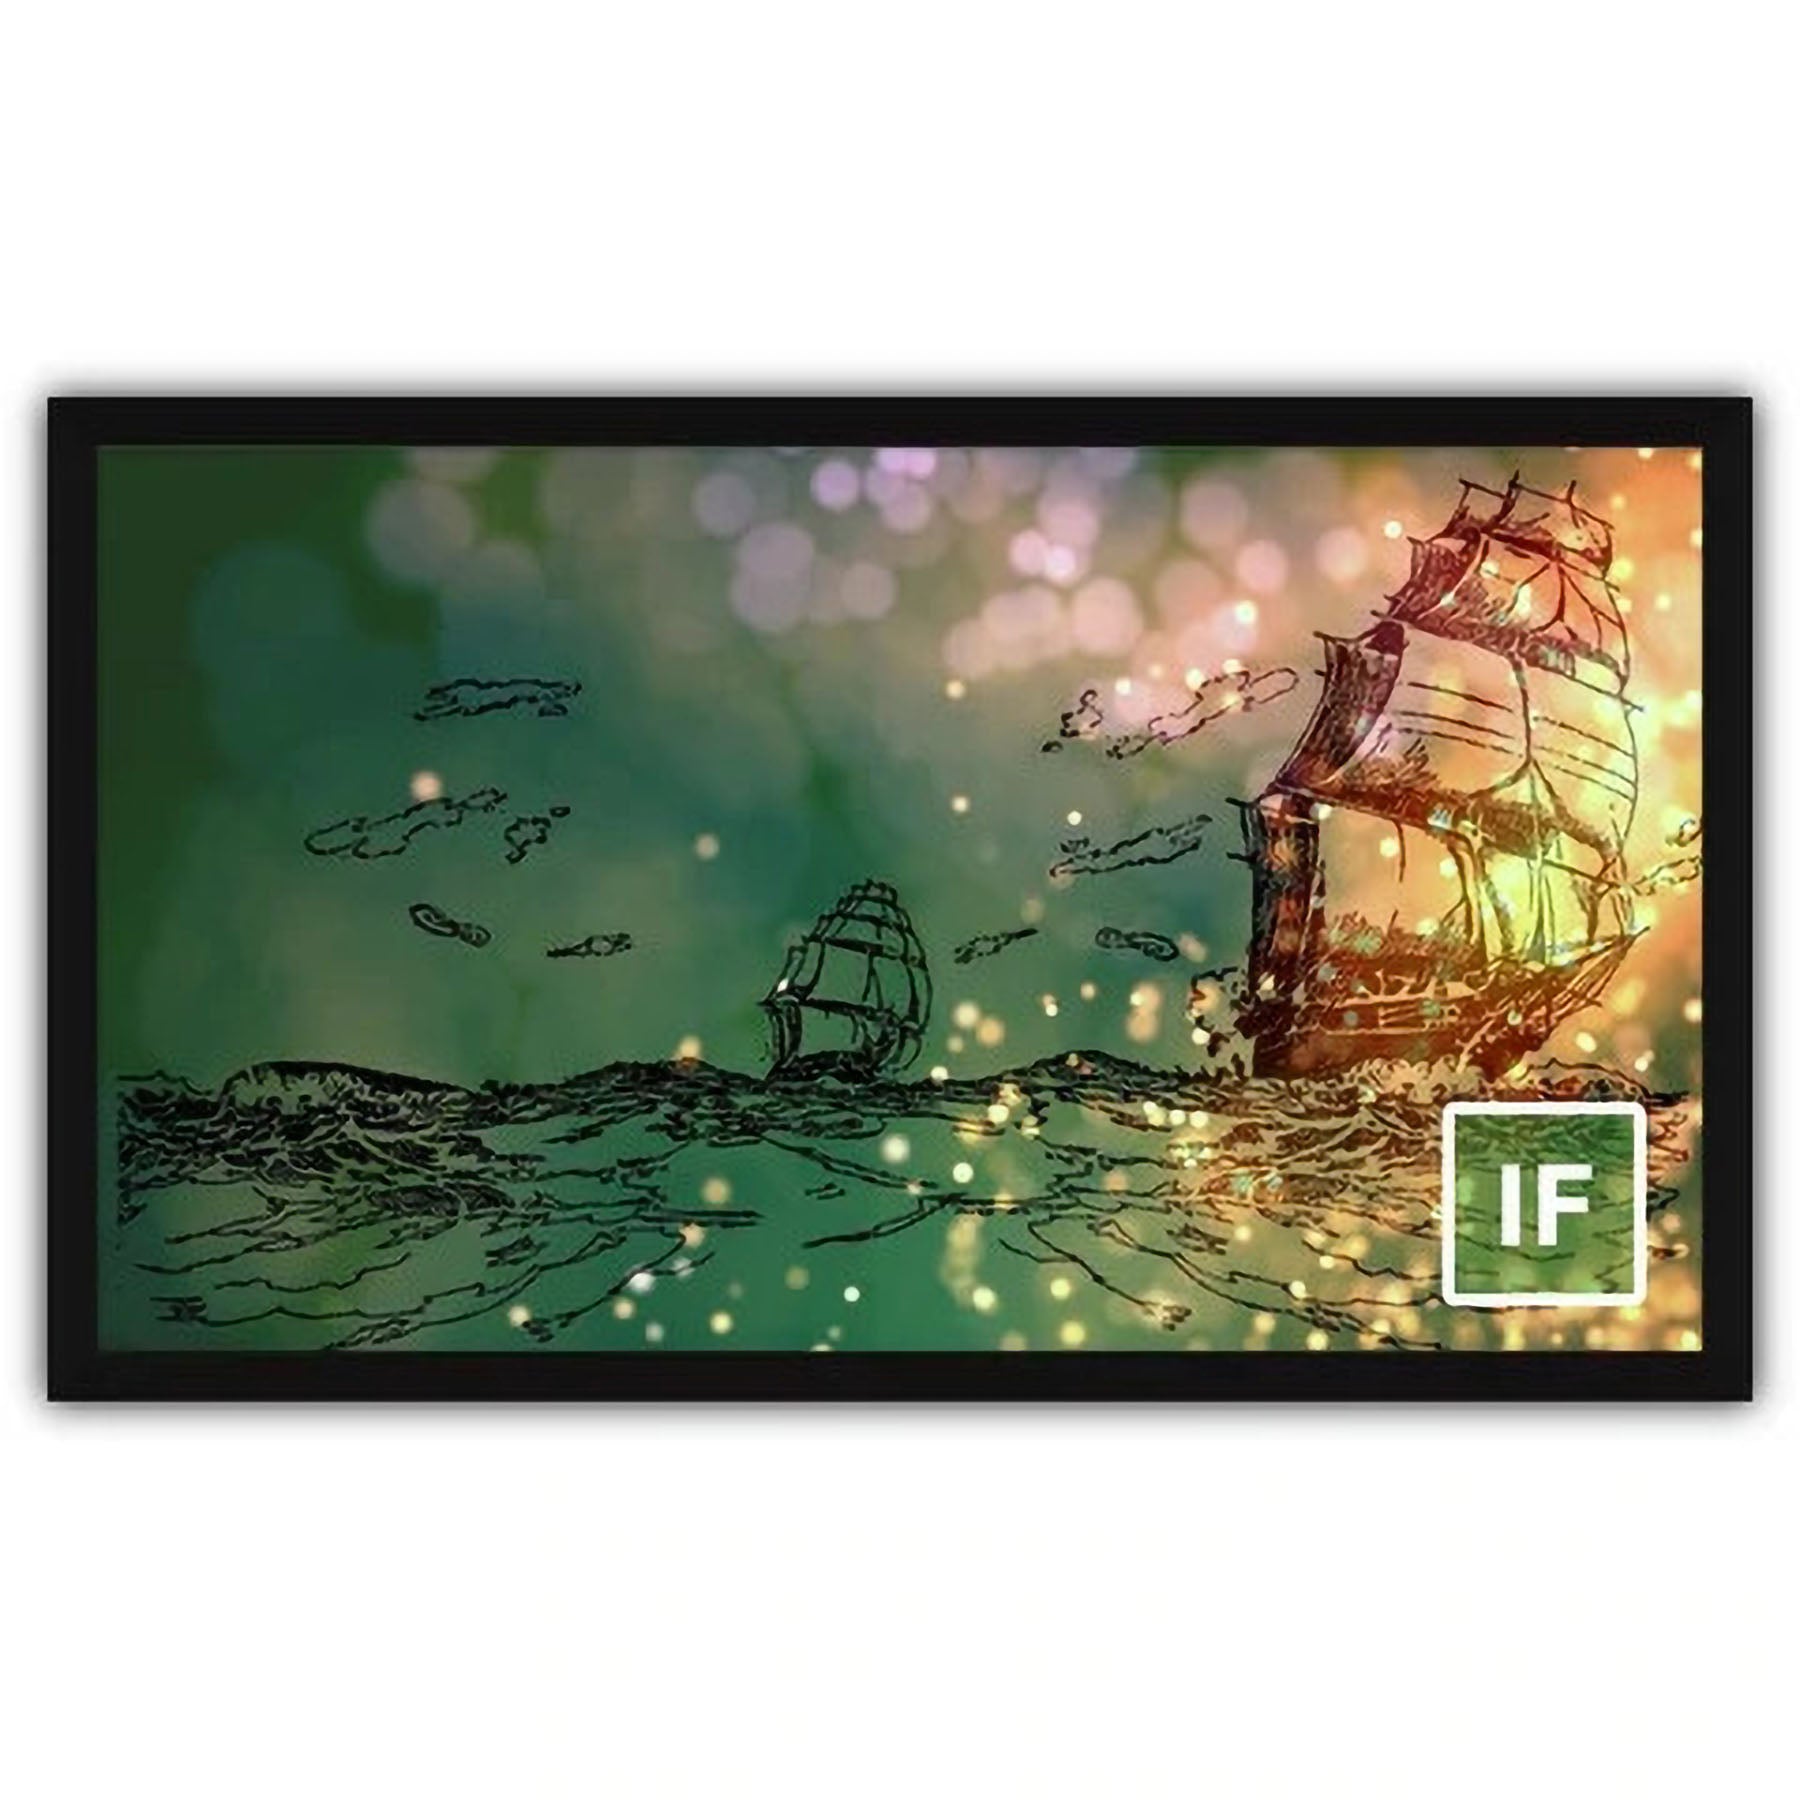 Severtson Screens Impression Series 16:9 112-inch Fixed Frame Projection Screen